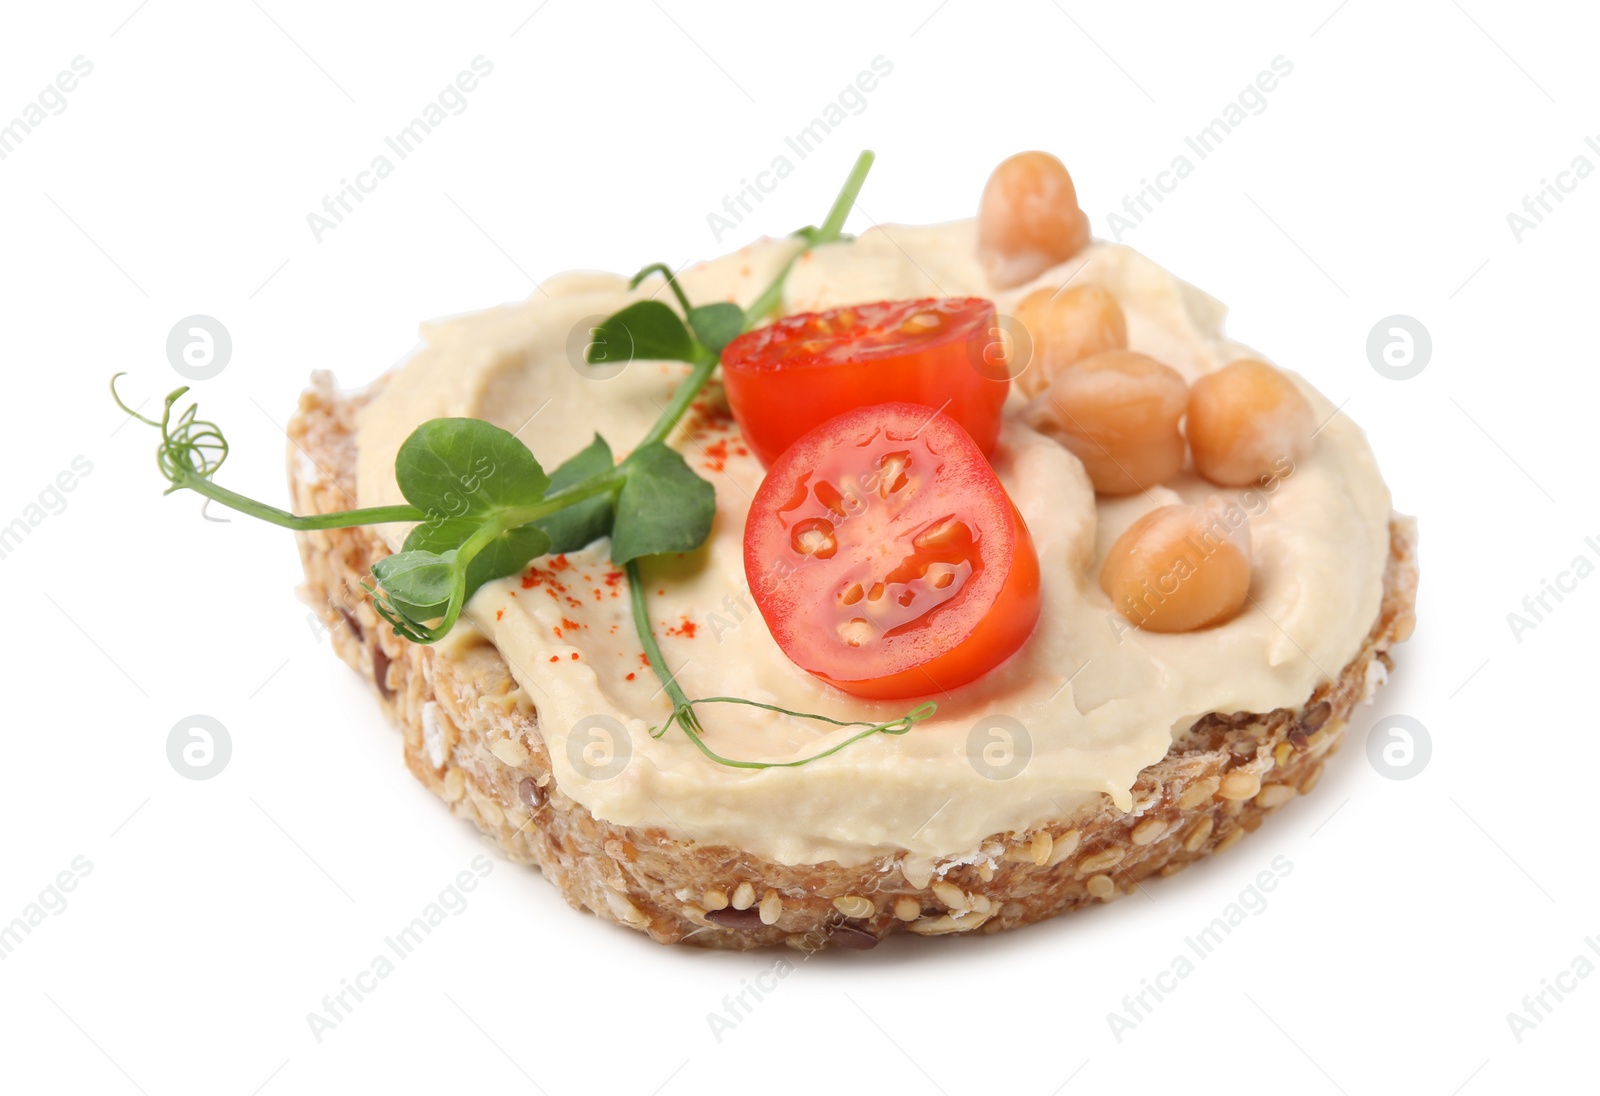 Photo of Delicious sandwich with hummus, tomato slices and chickpeas on white background